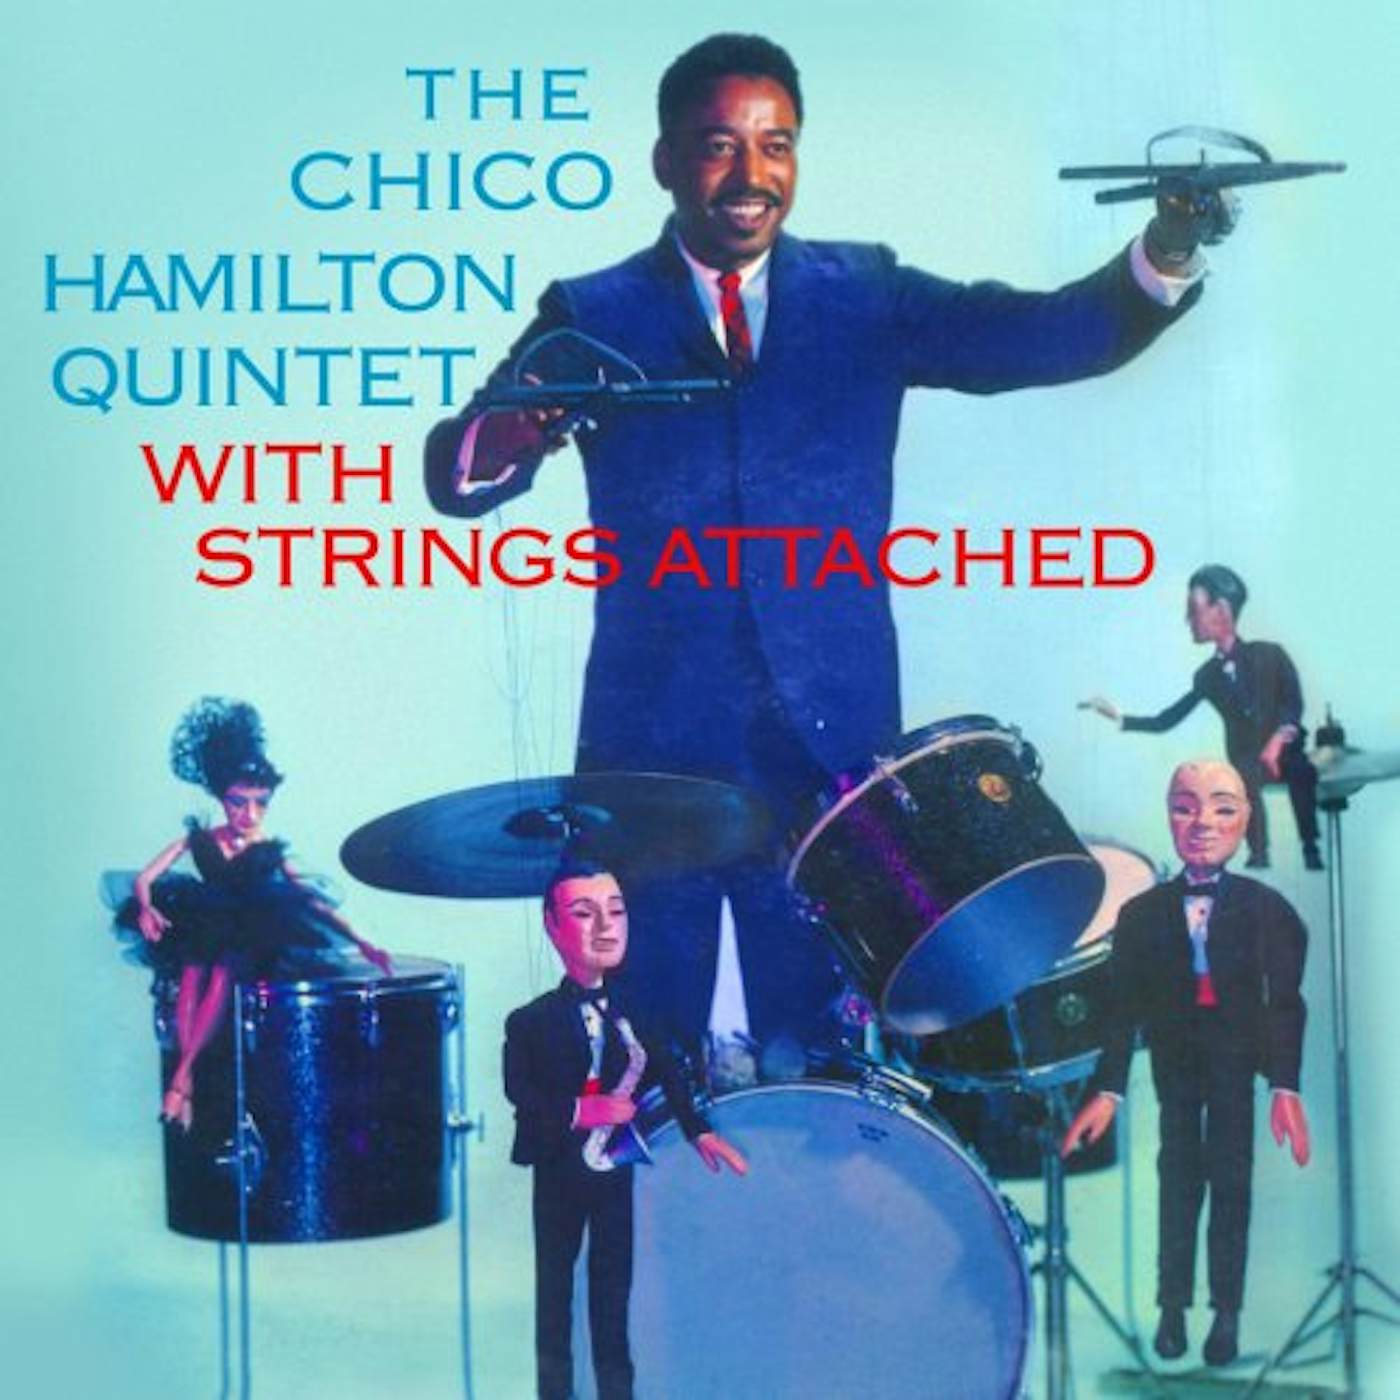 CHICO HAMILTON QUINTET WITH STRINGS ATTACHED CD